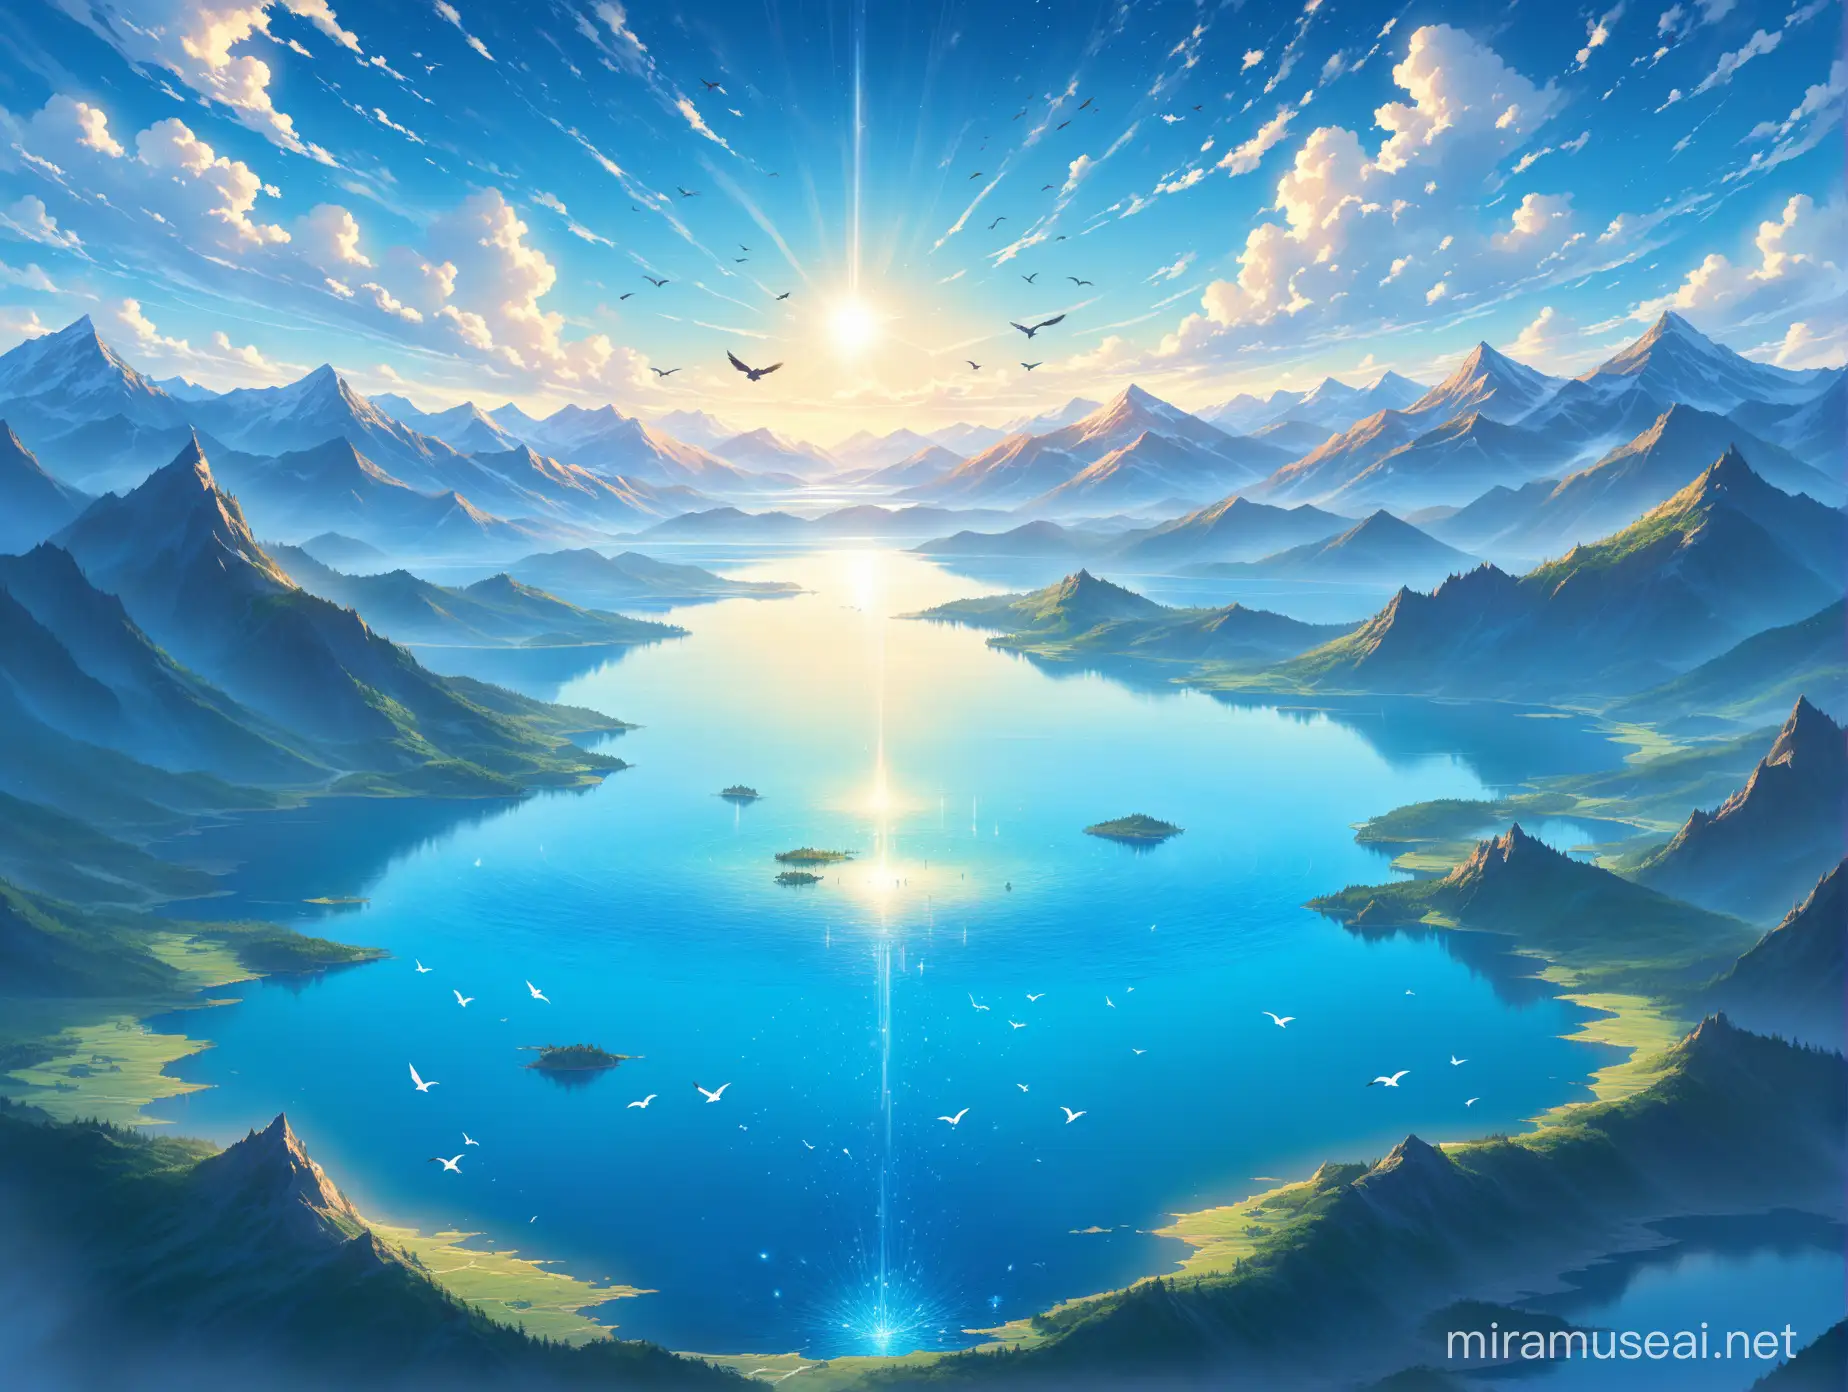 a giant blue fantasy lake, there are mountains in the distance. some birds fly over the lake. the sky is partly cloudy but there are cracks of light. into souls